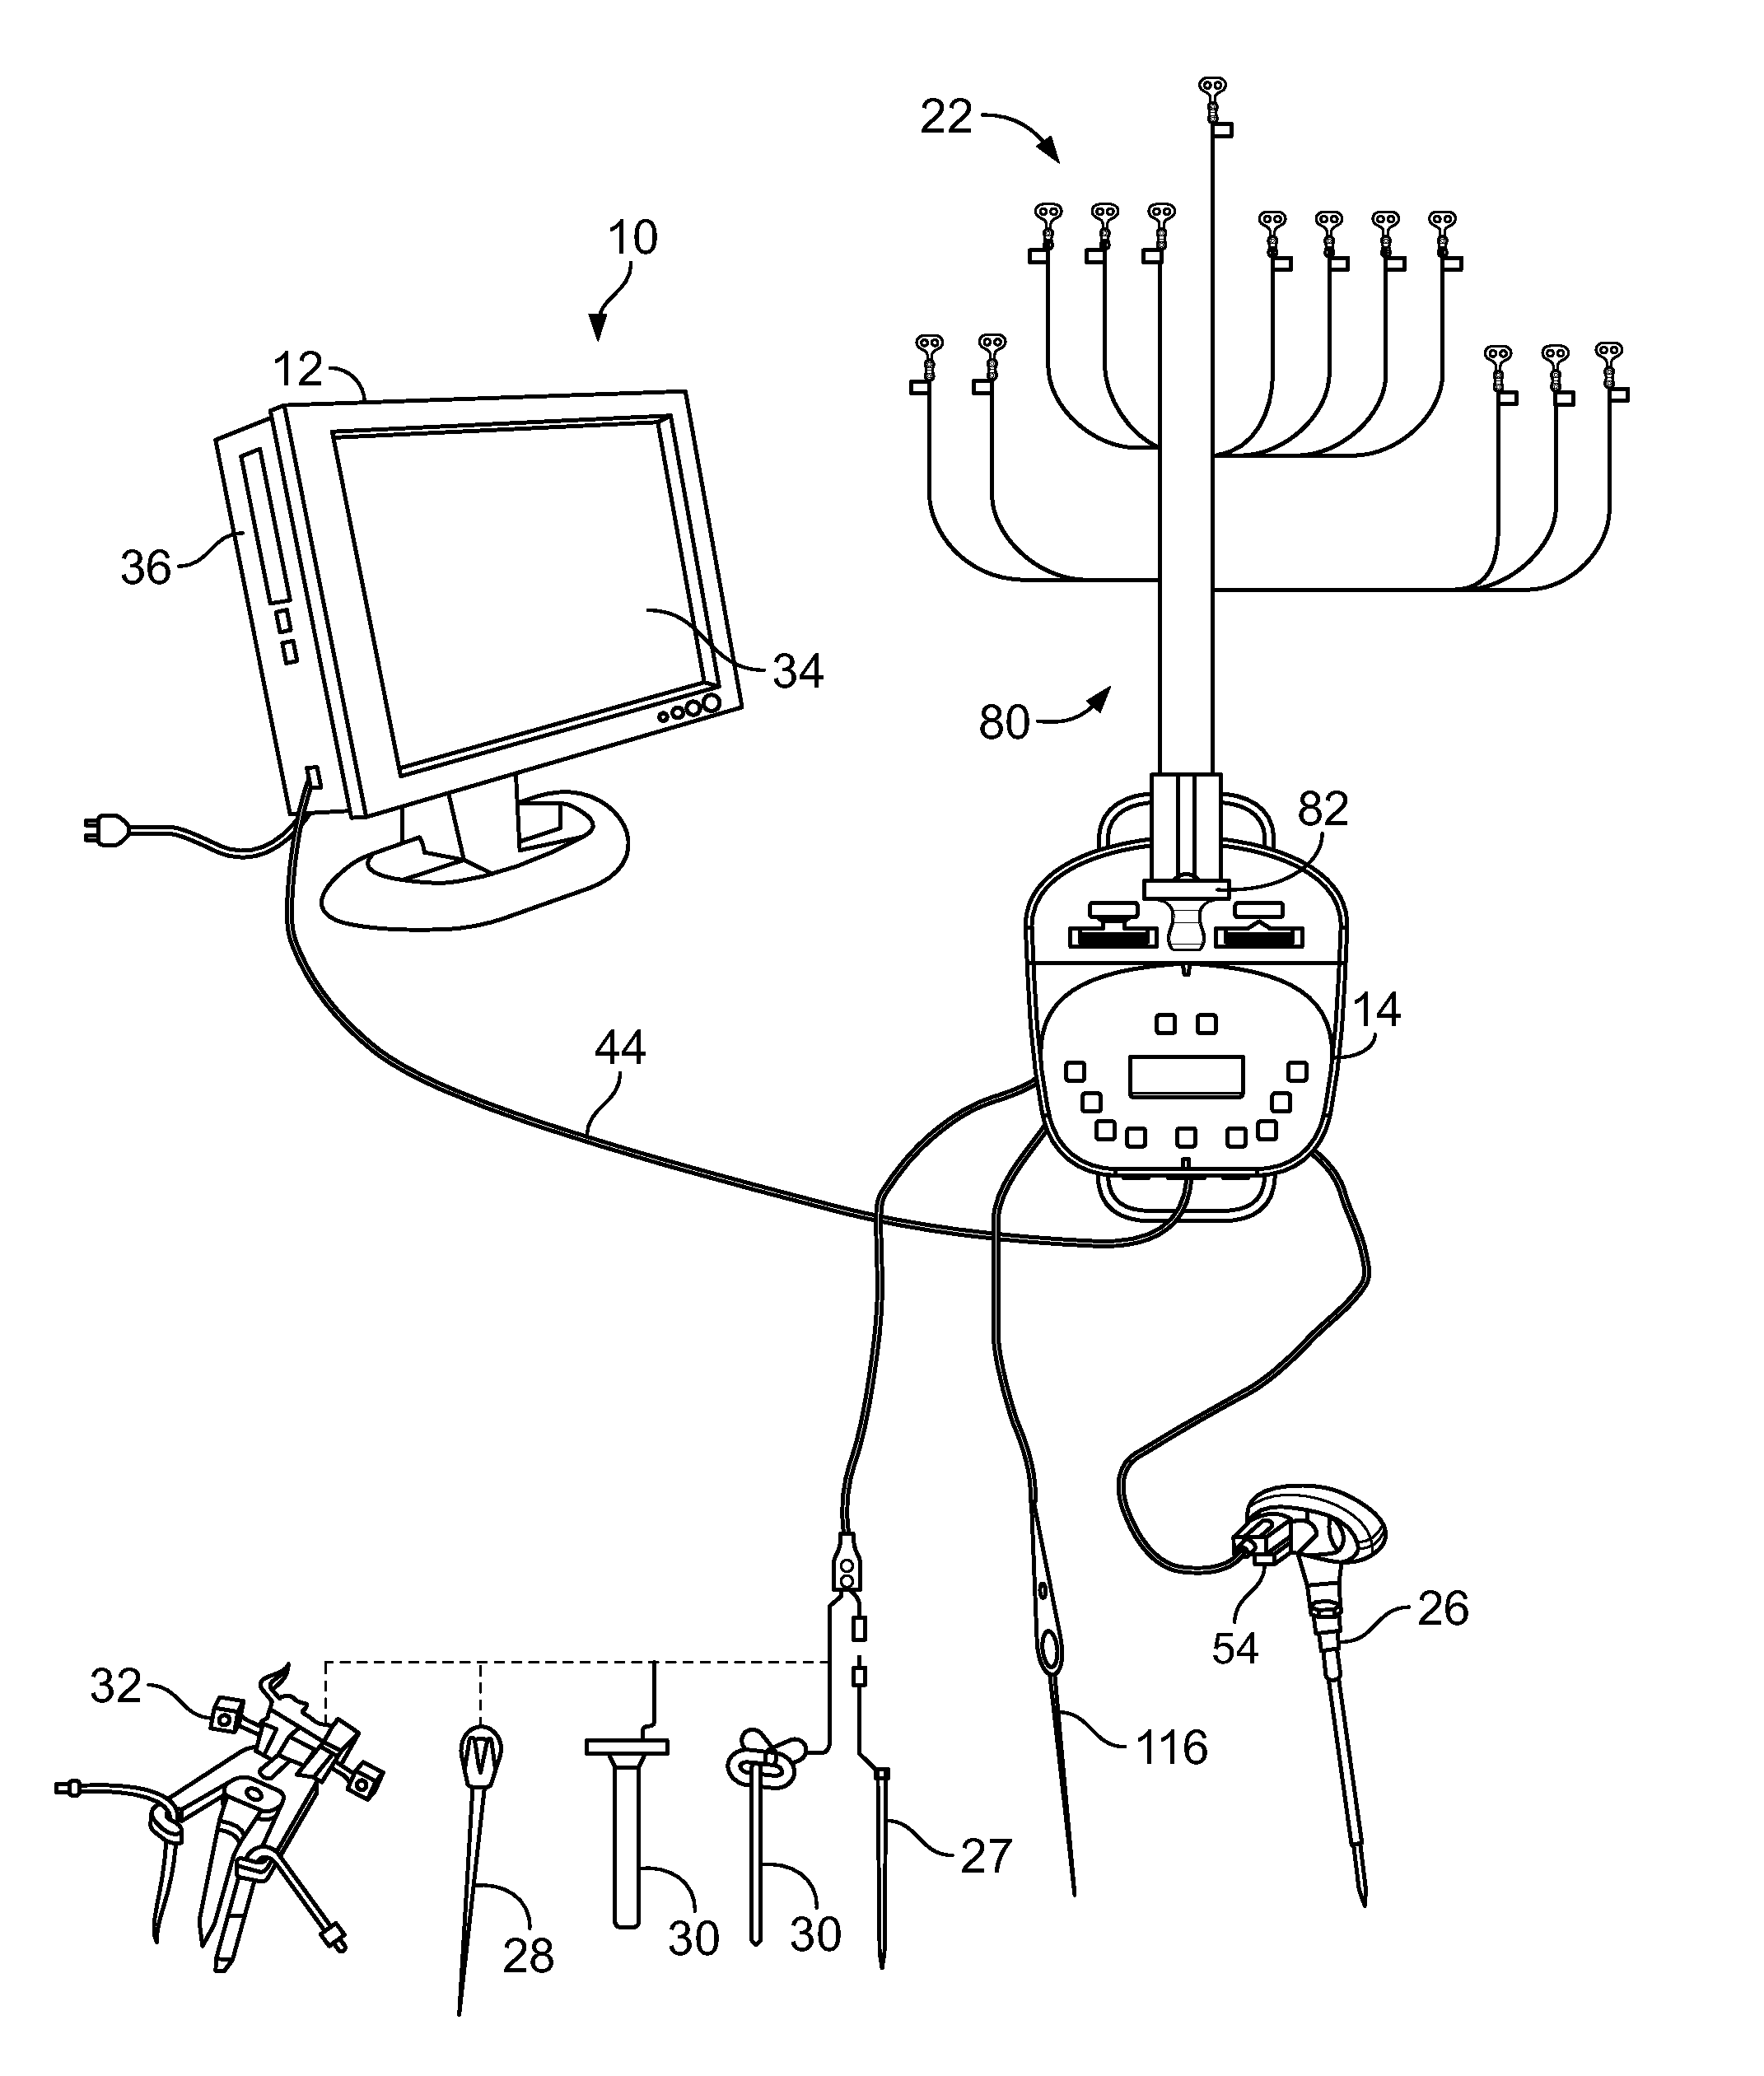 Systems and methods for performing neurophysiologic monitoring during spine surgery